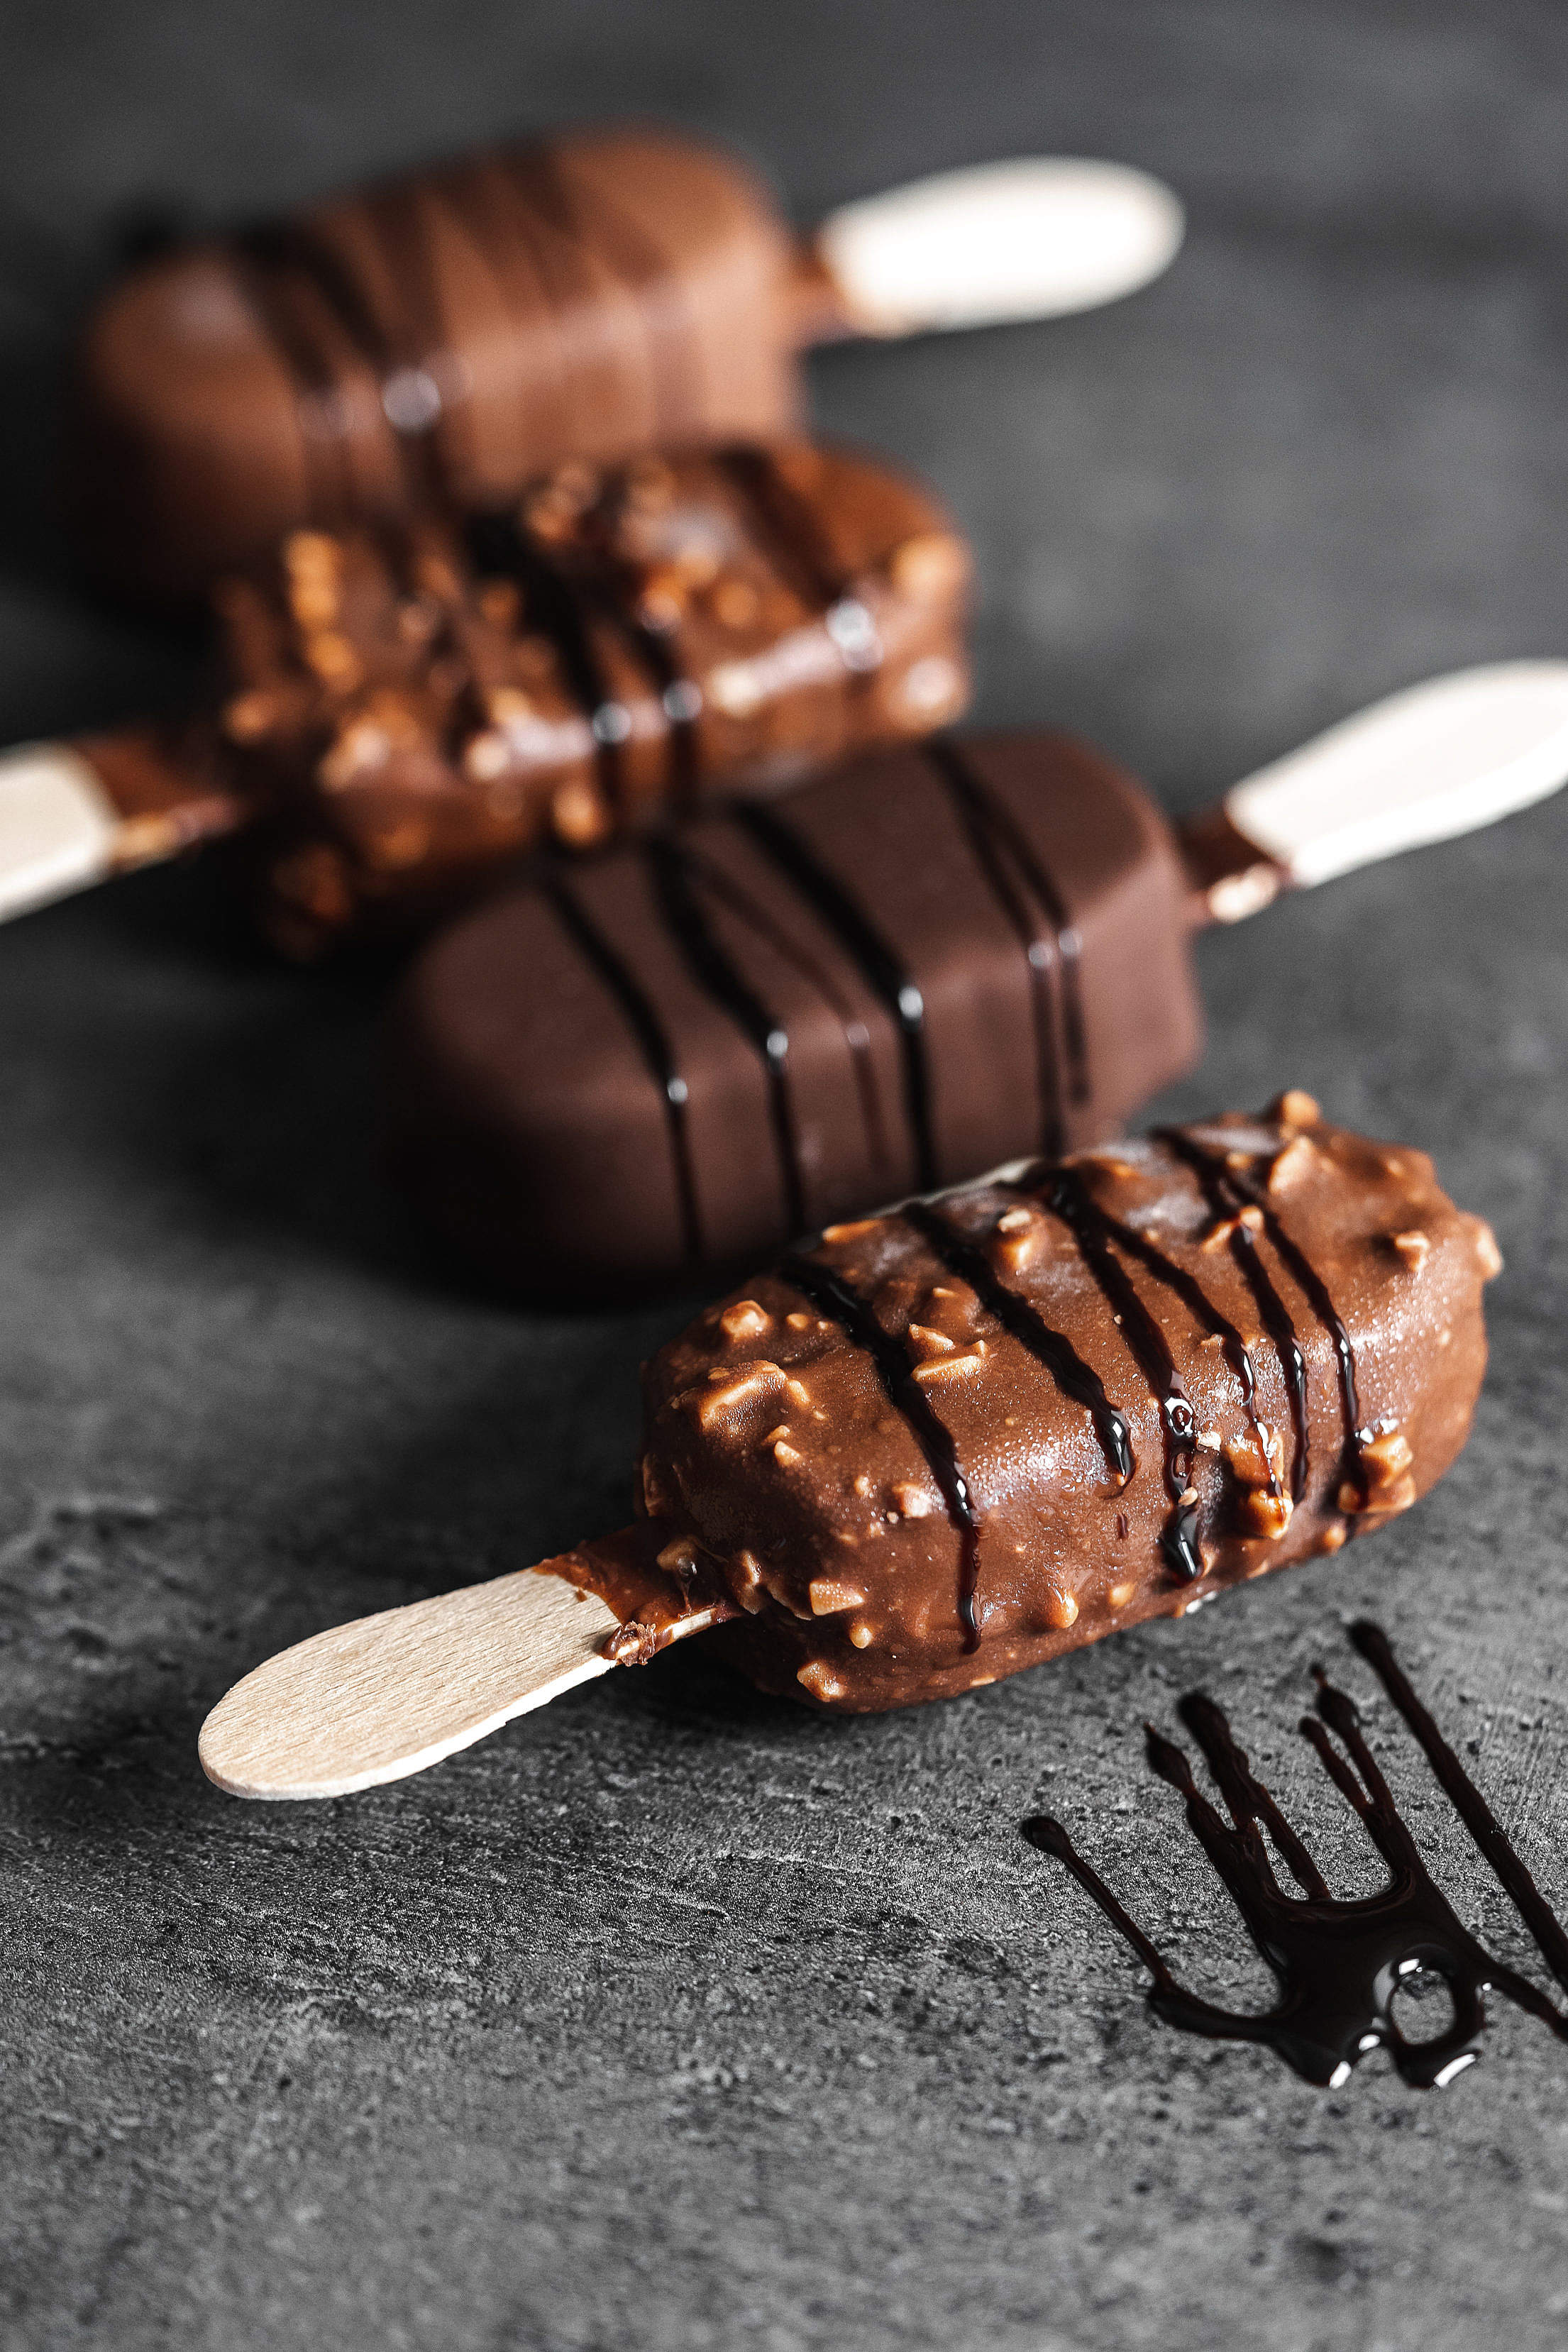 Chocolate Ice Lolly Vertical Free Stock Photo